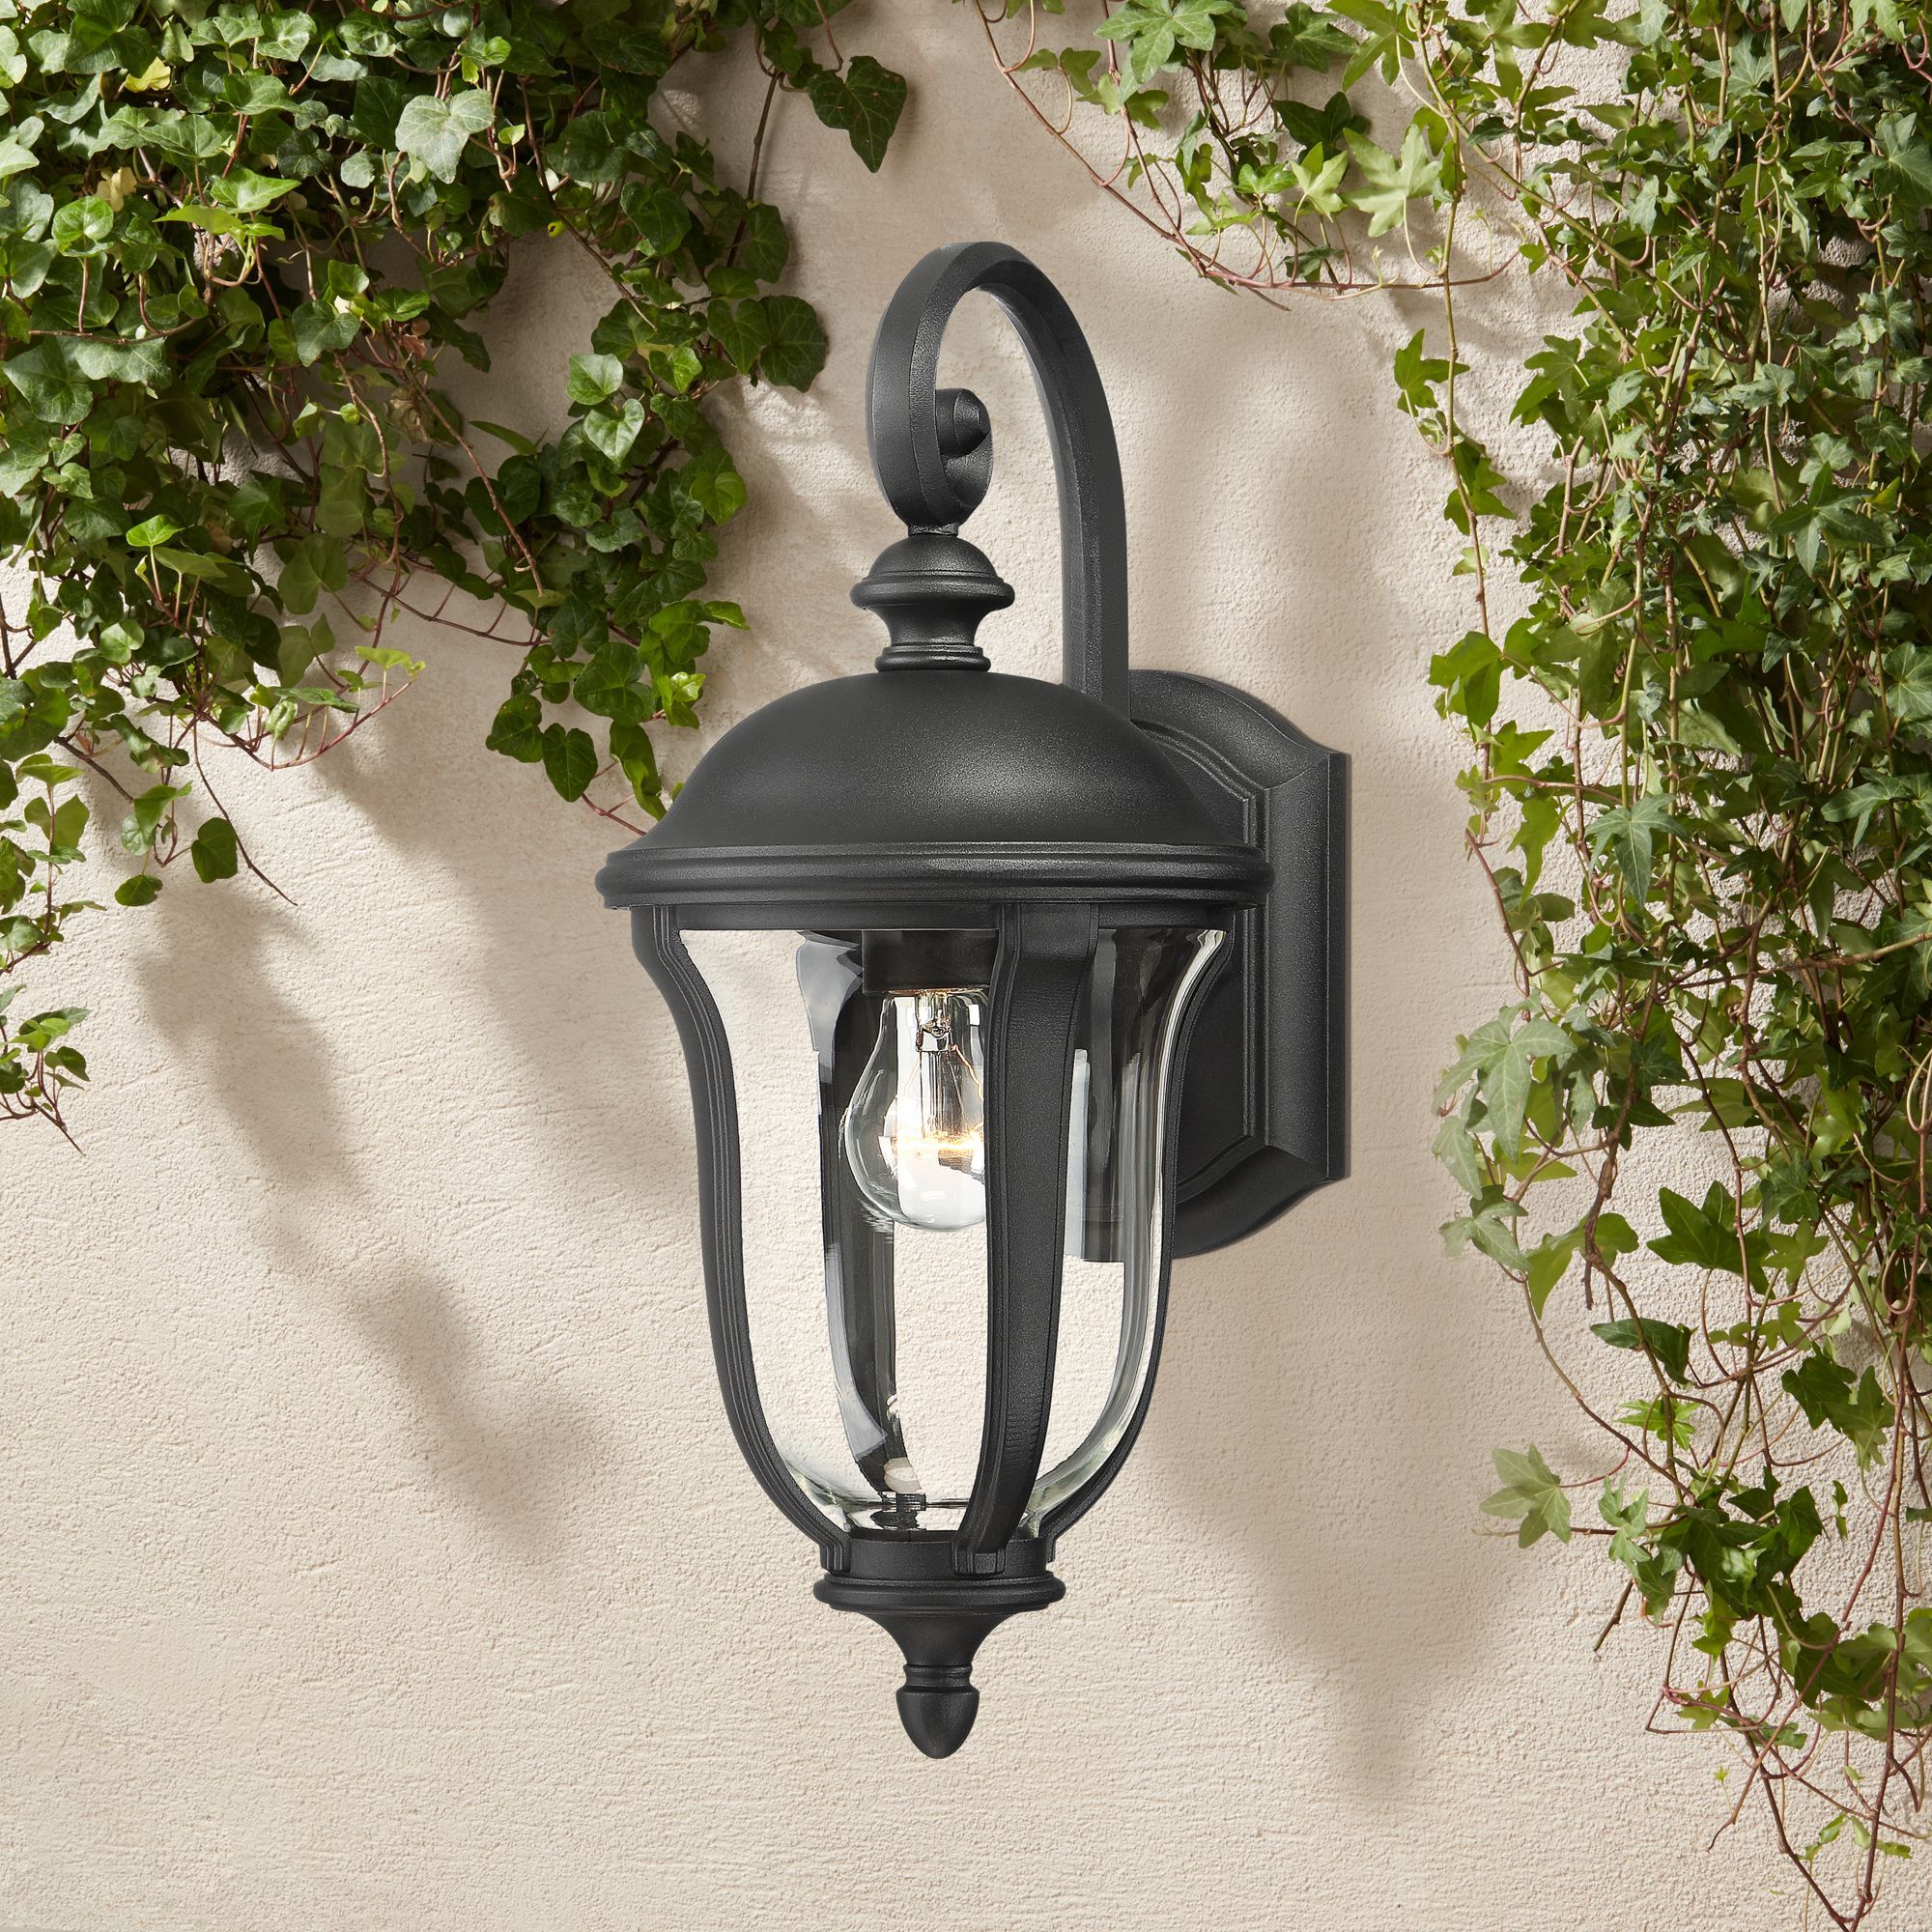 Malak Outdoor Wall Lanterns In Latest John Timberland Traditional Outdoor Wall Light Fixture (View 1 of 15)